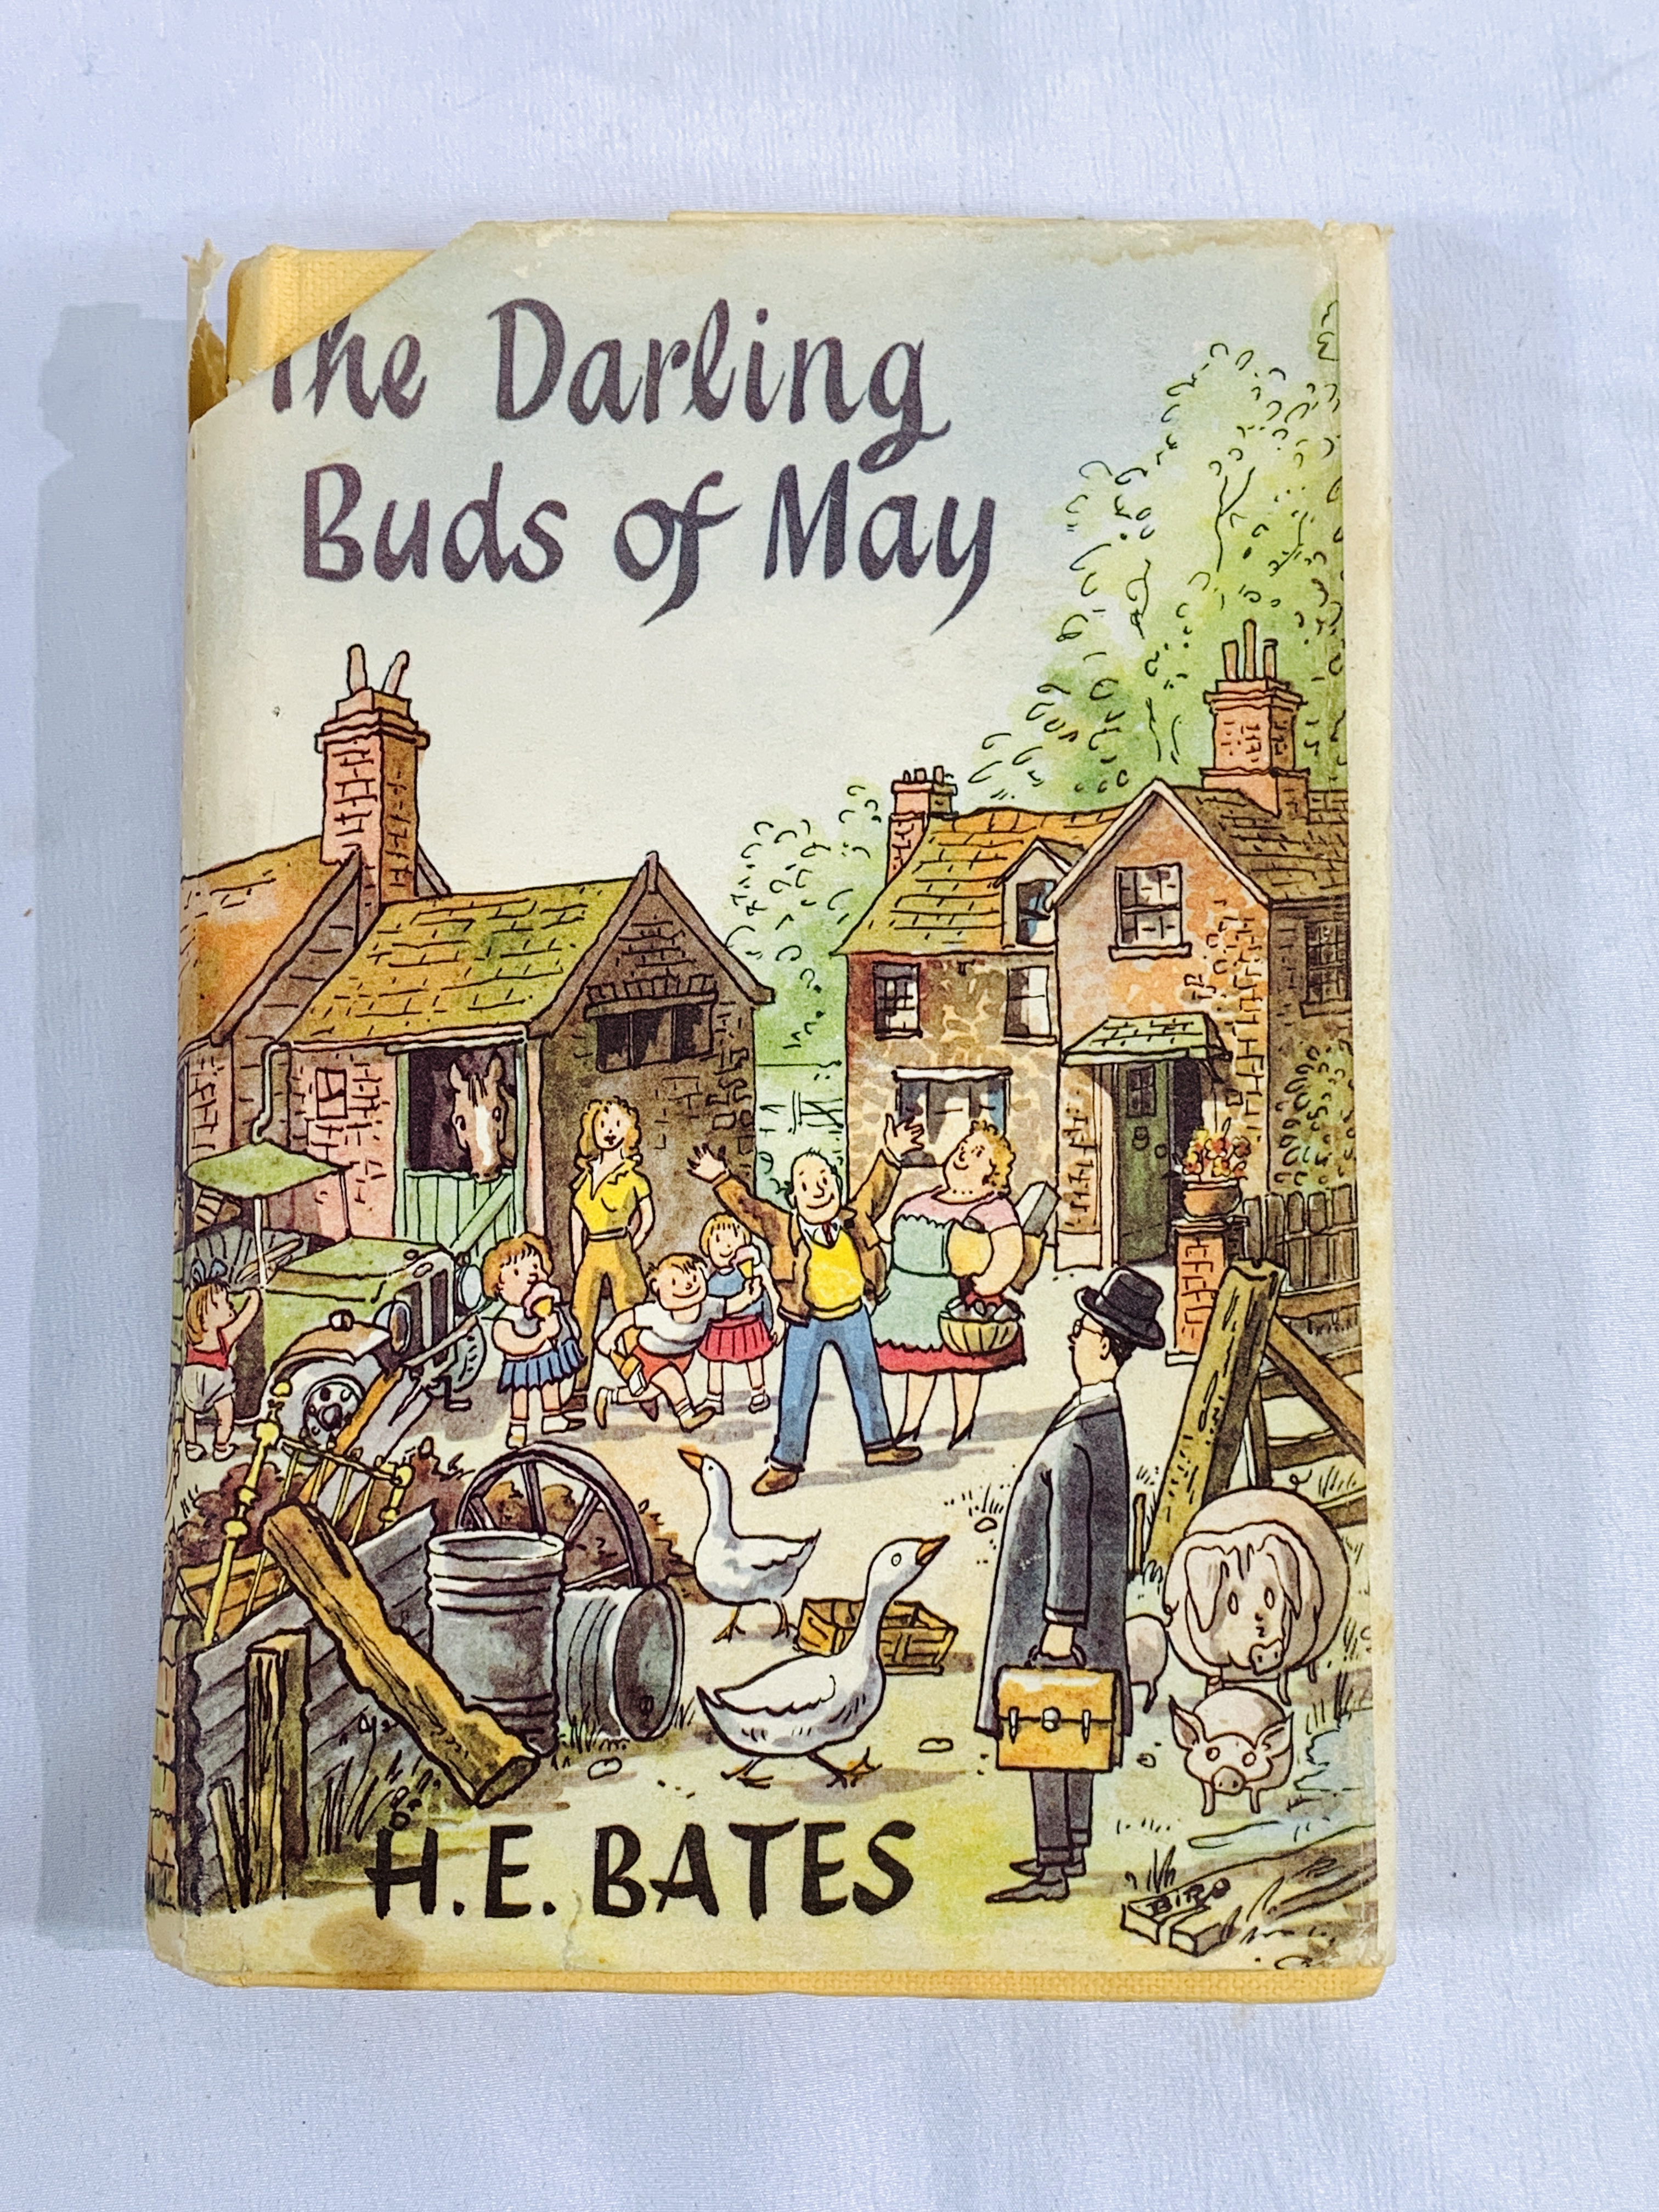 The Darling Buds of May, H.E. Bates, 1958